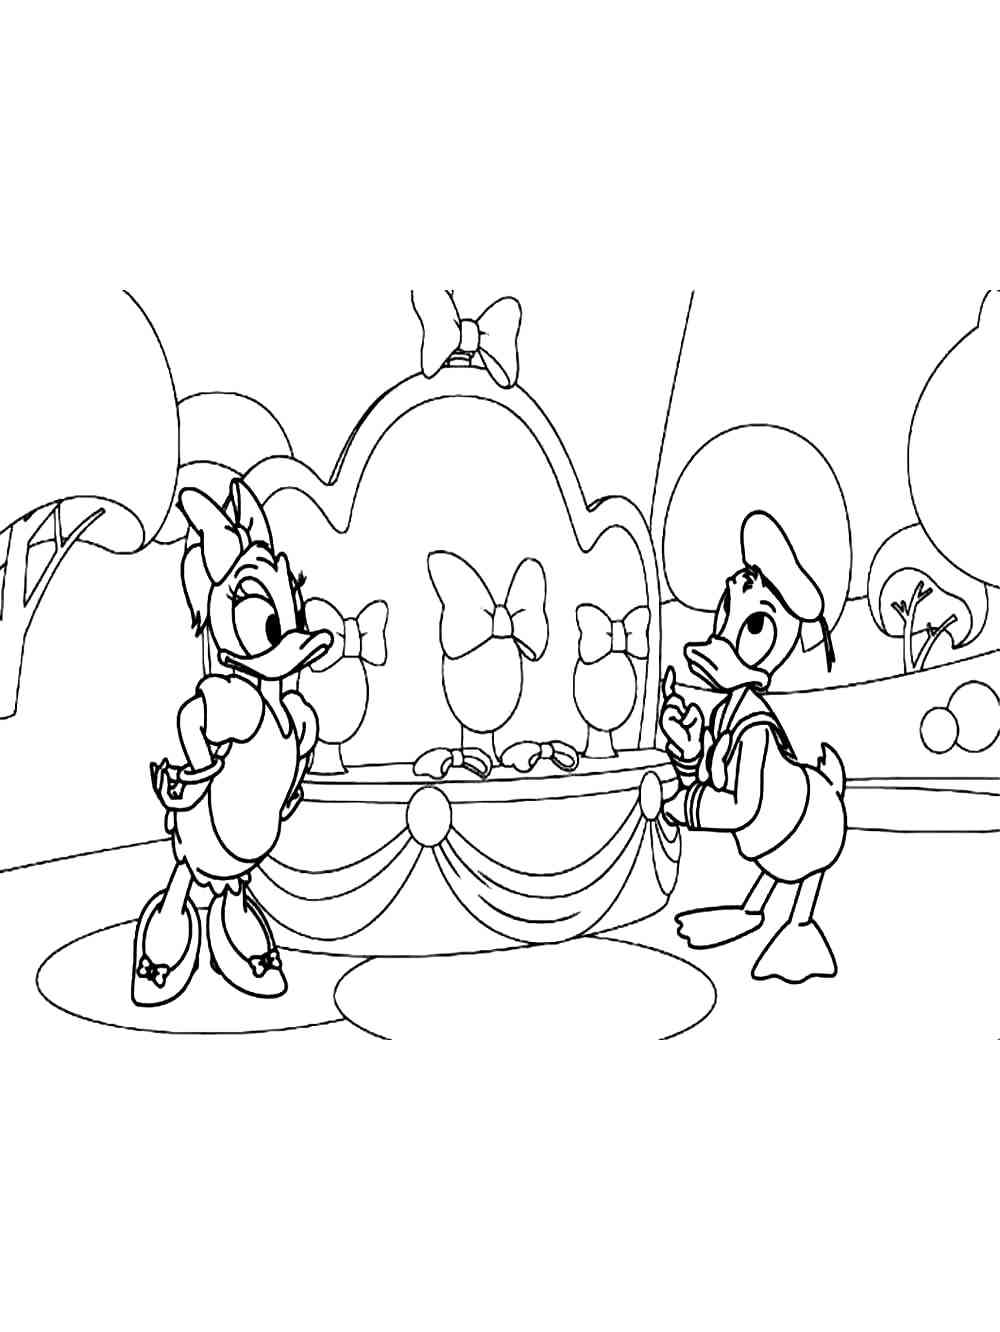 Donald Duck 37 coloring page